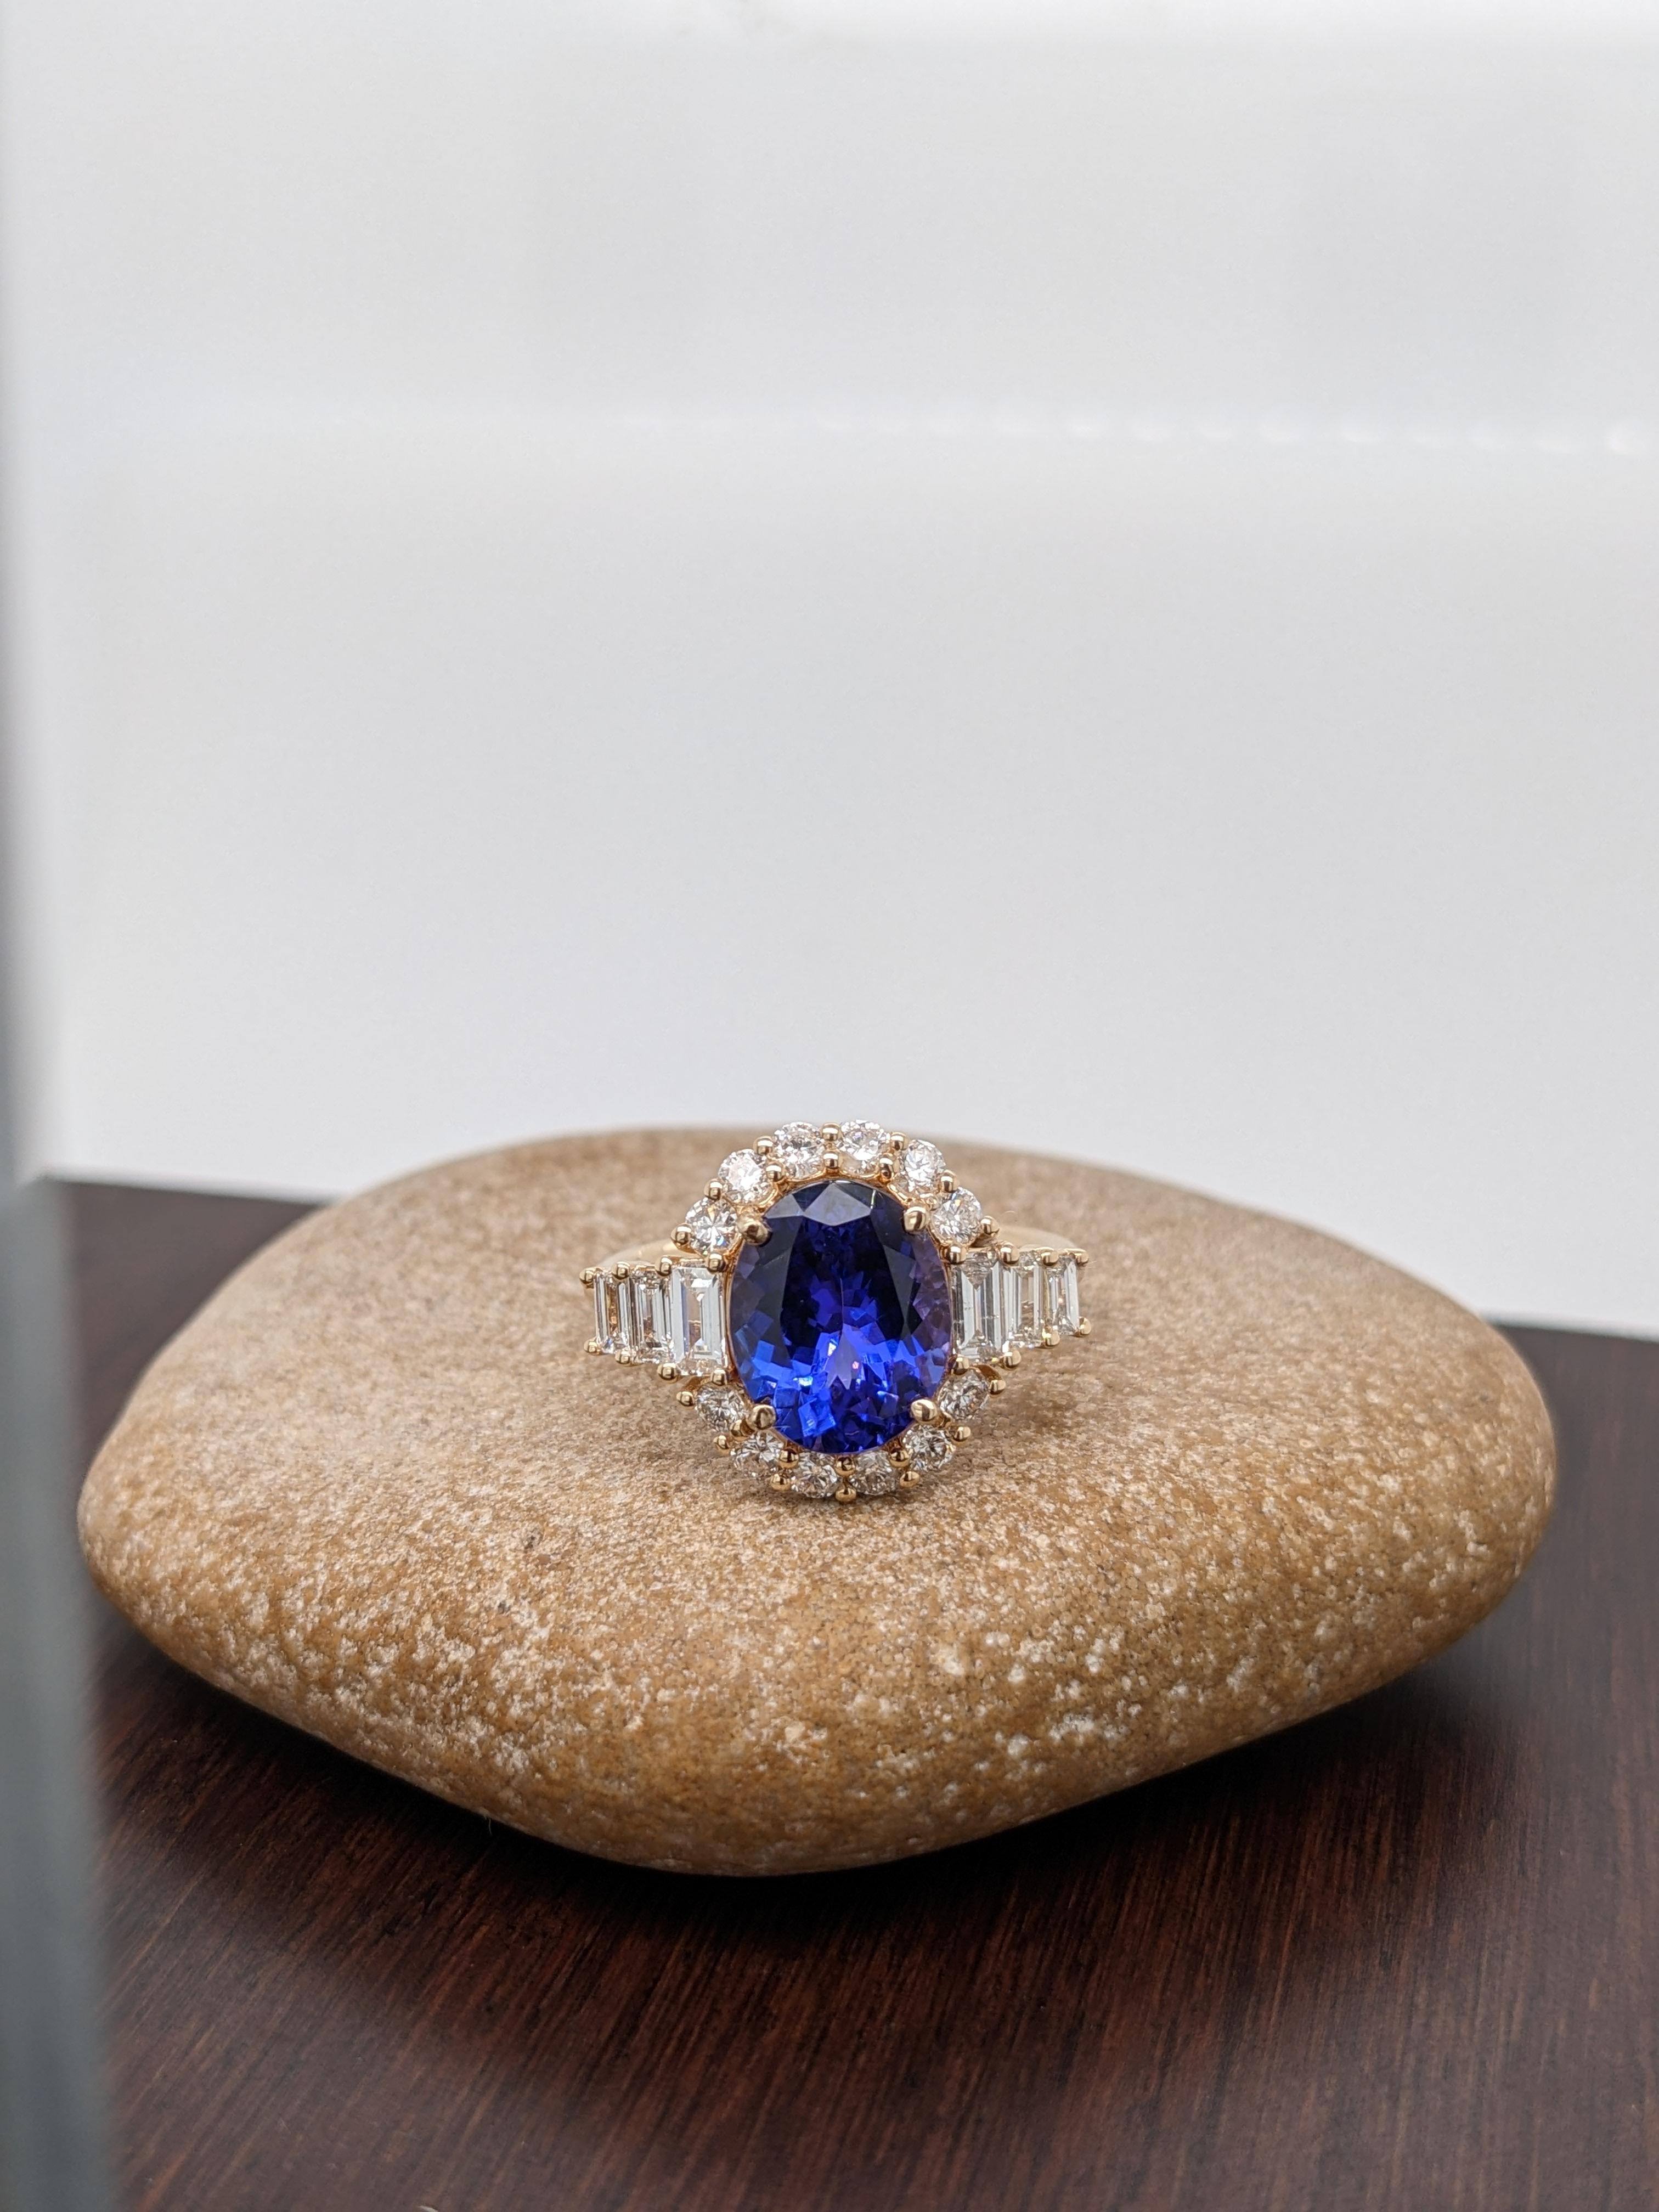 This stunning 3 carat oval cut tanzanite has a deep blue color with the perfect amount of purple flashes. An absolutely stunning ring for an engagement or any kind of statement! This NNJ Designs original ring setting features a mix of round and